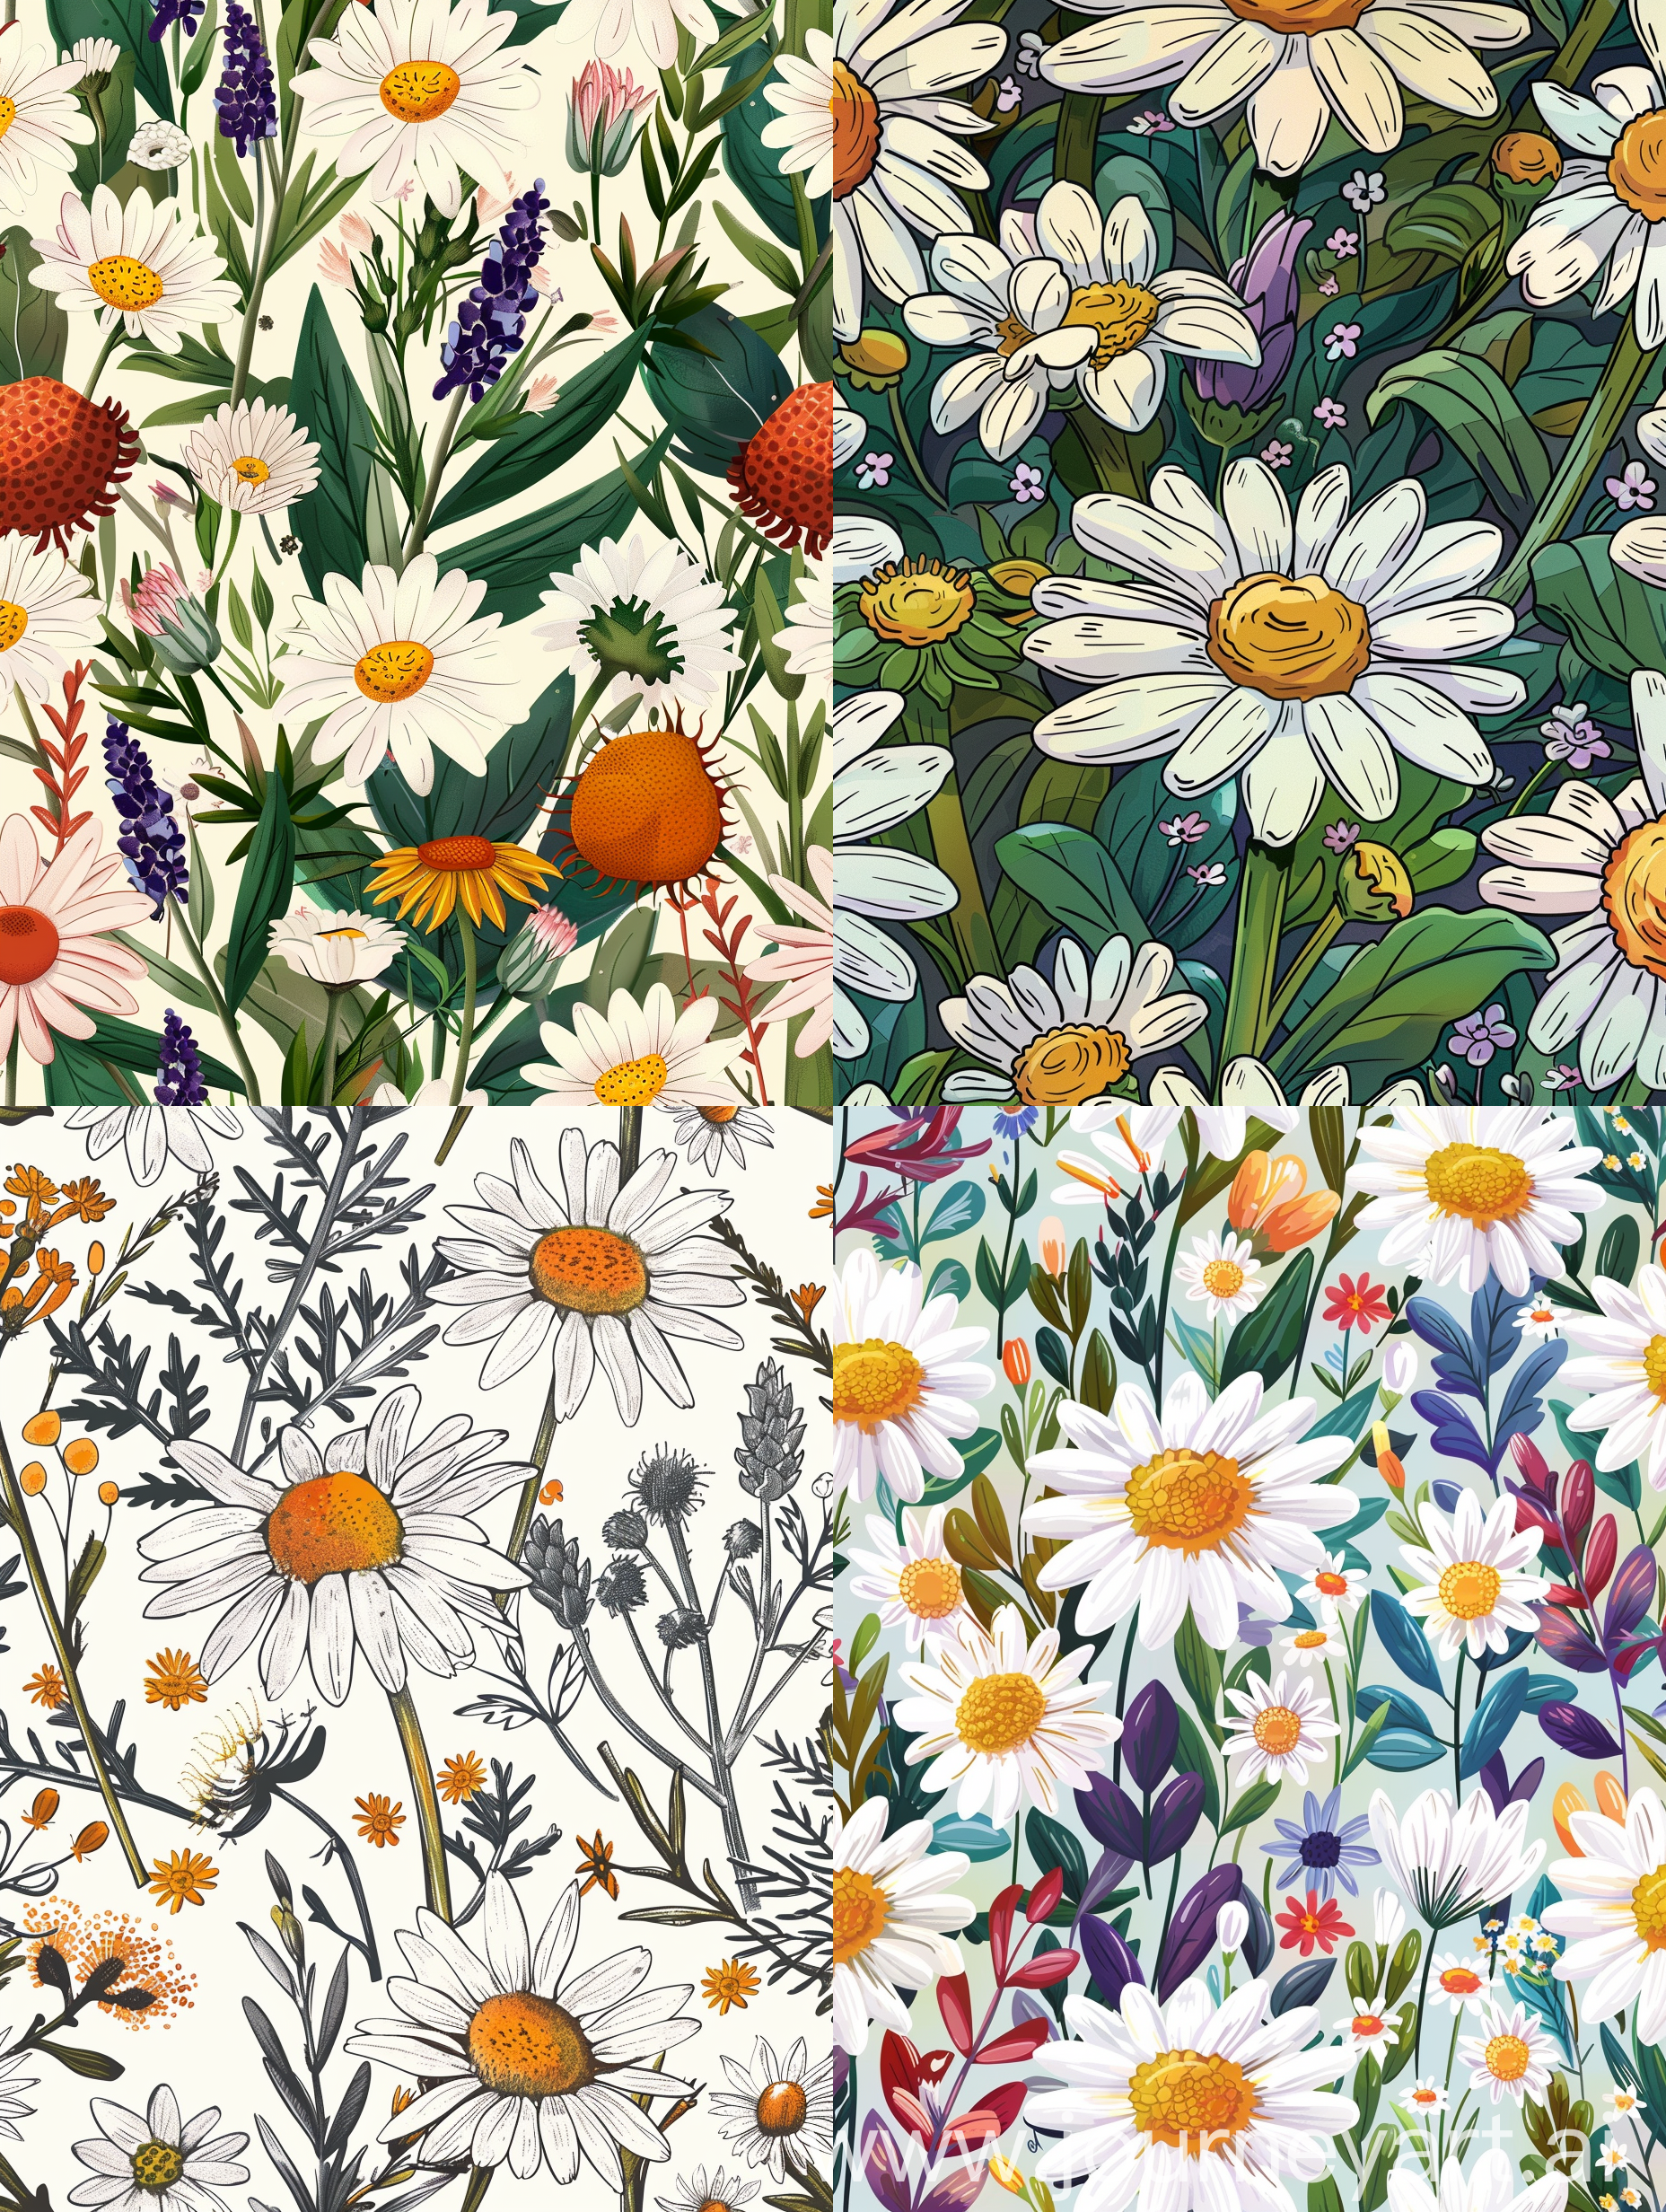 cartoon style art on vector of daisies and other flowers on a seamless pattern